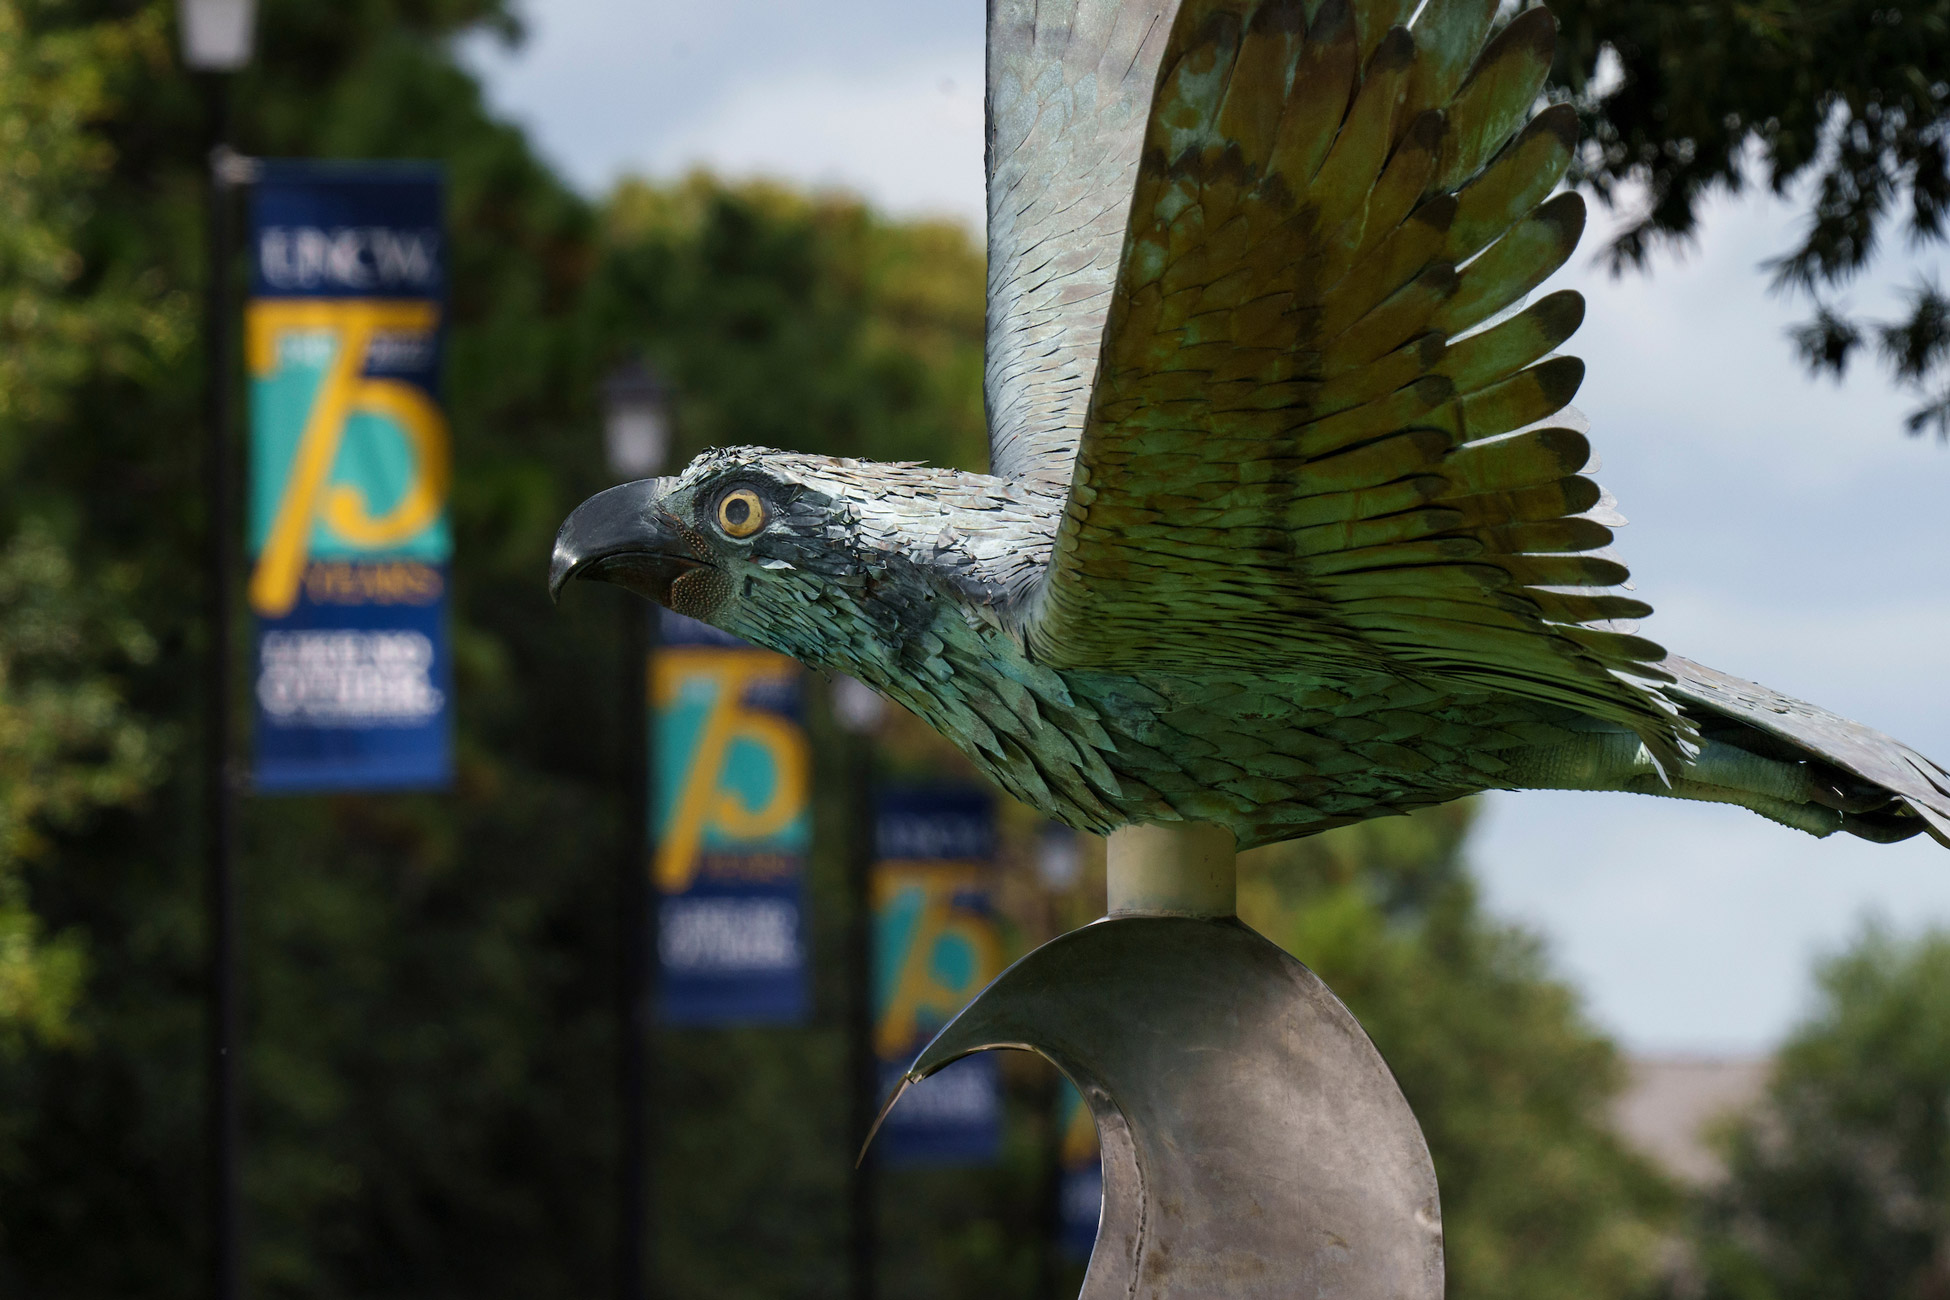 Soaring Seahawk statue with banners in background